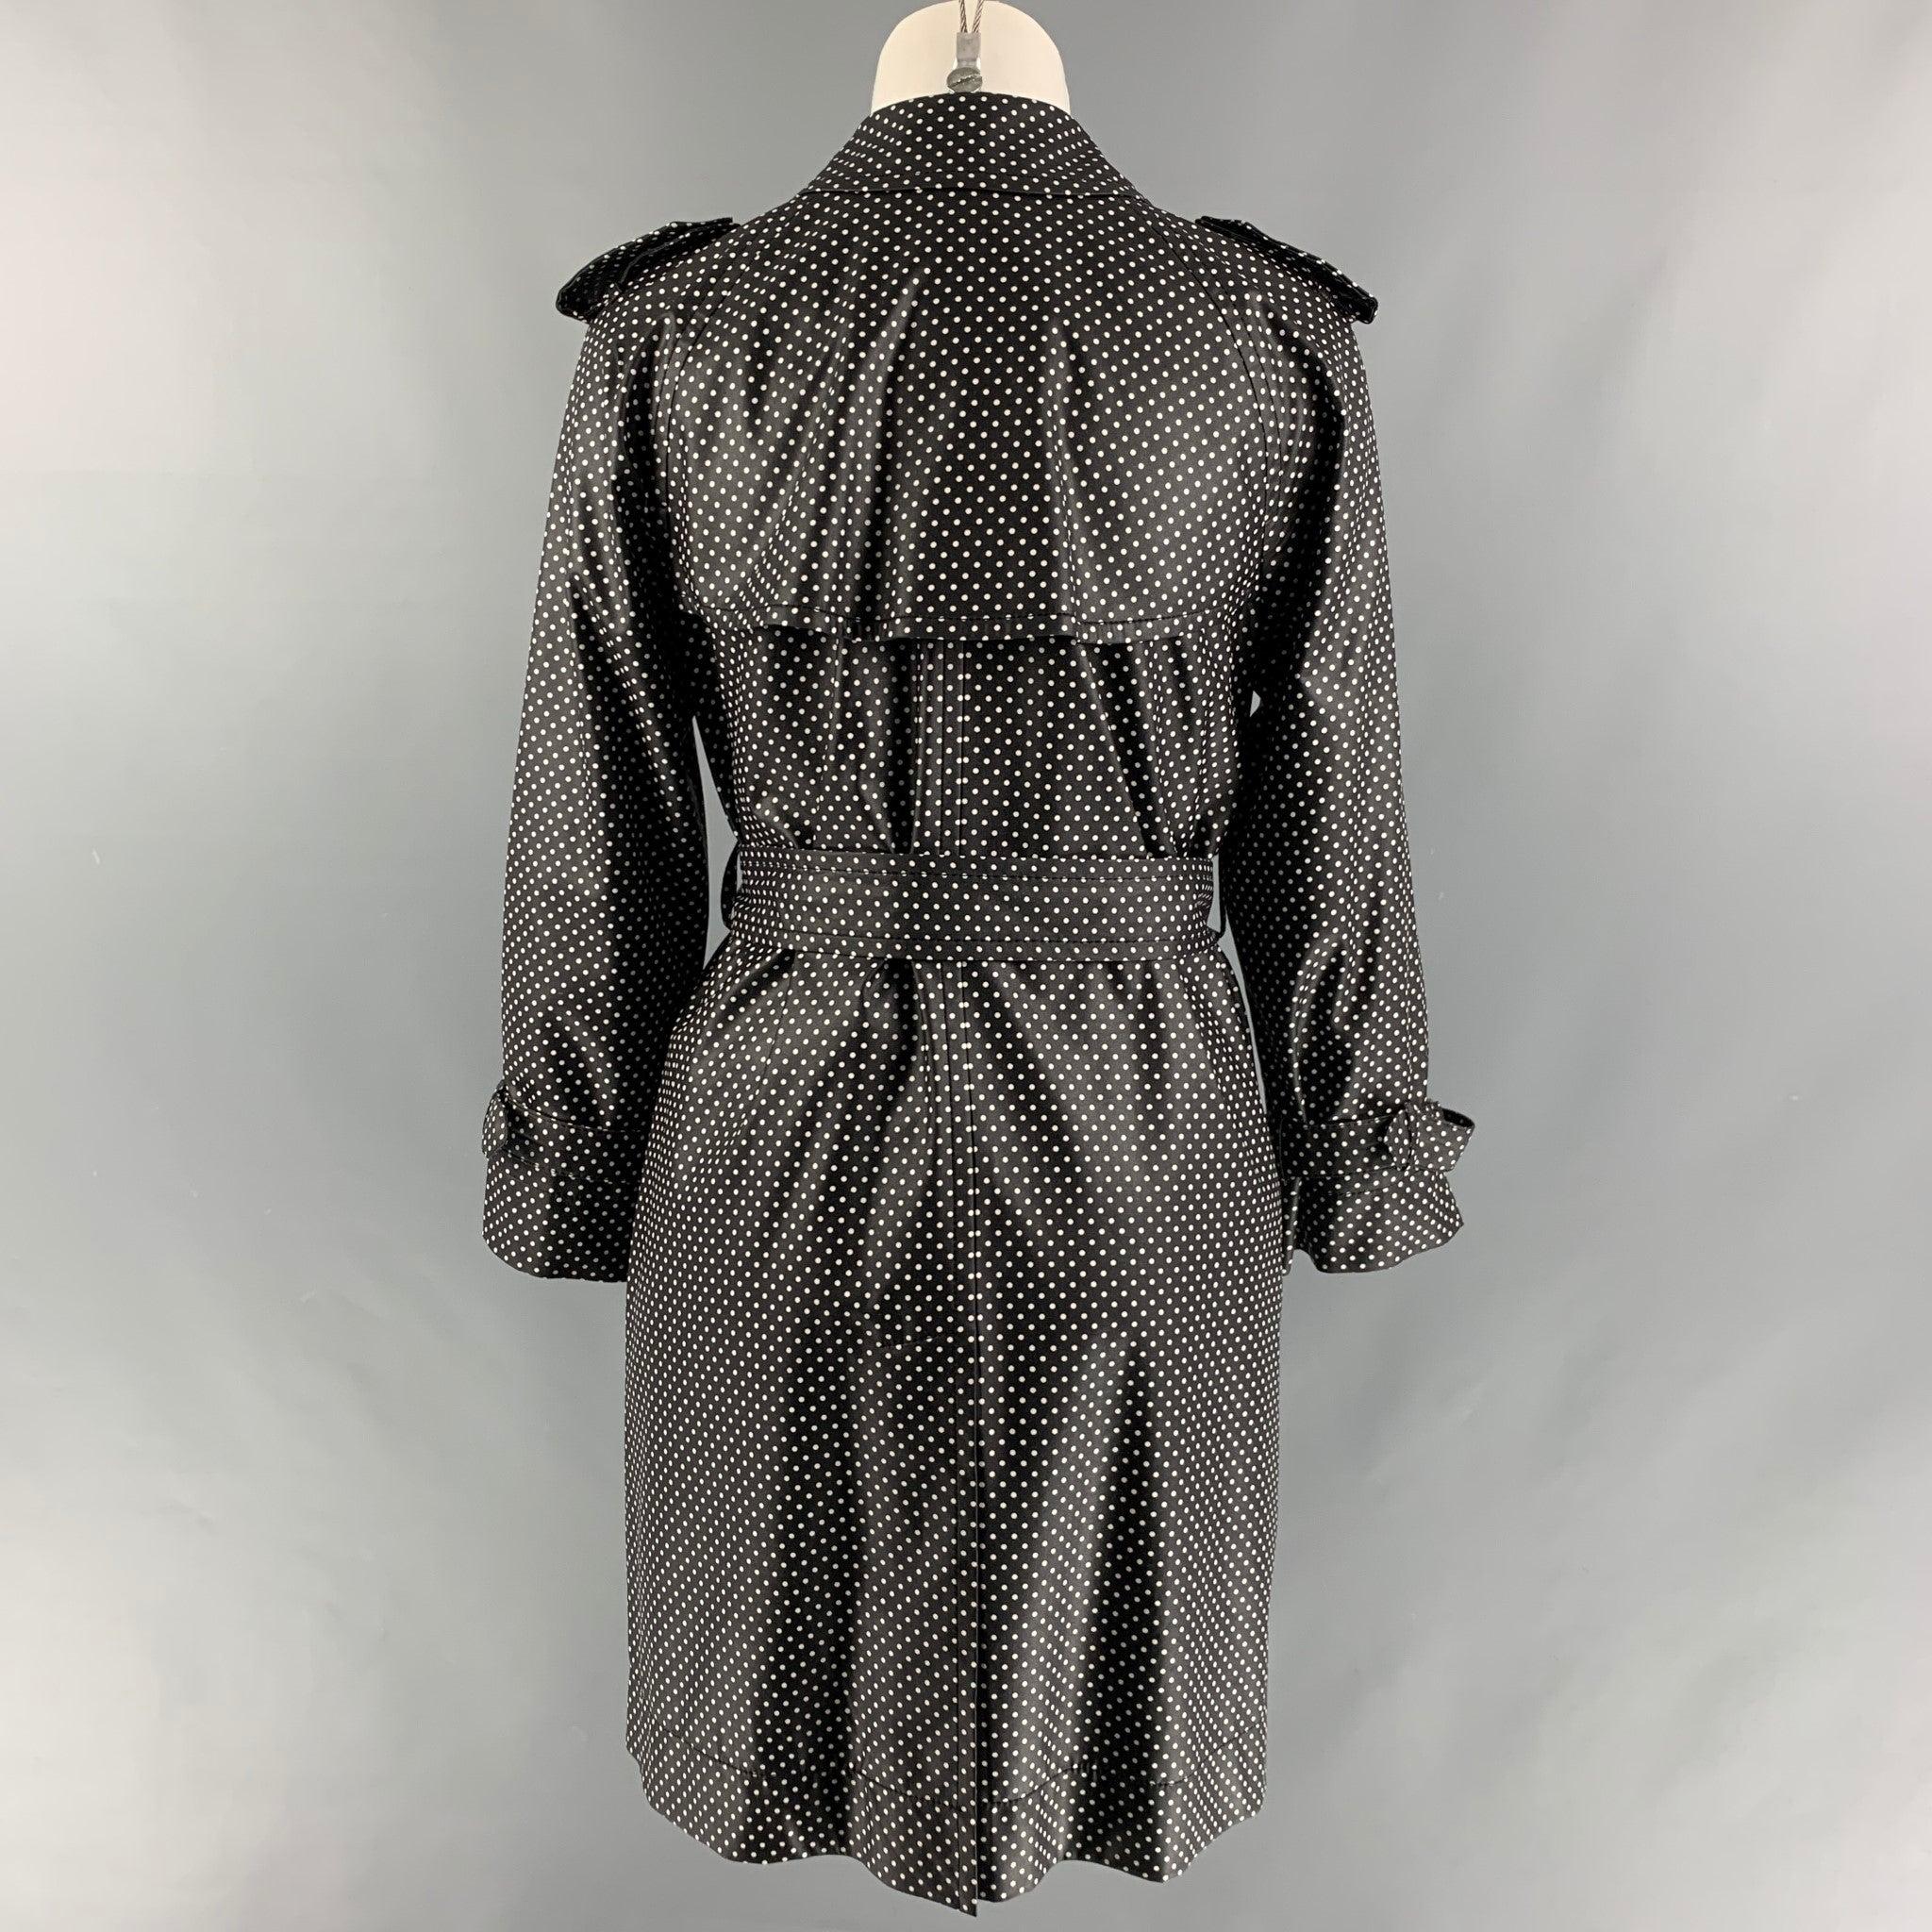 MARC JACOBS Size 4 Black & White Silk Blend Polka Dot Belted Trench Coat In Excellent Condition For Sale In San Francisco, CA